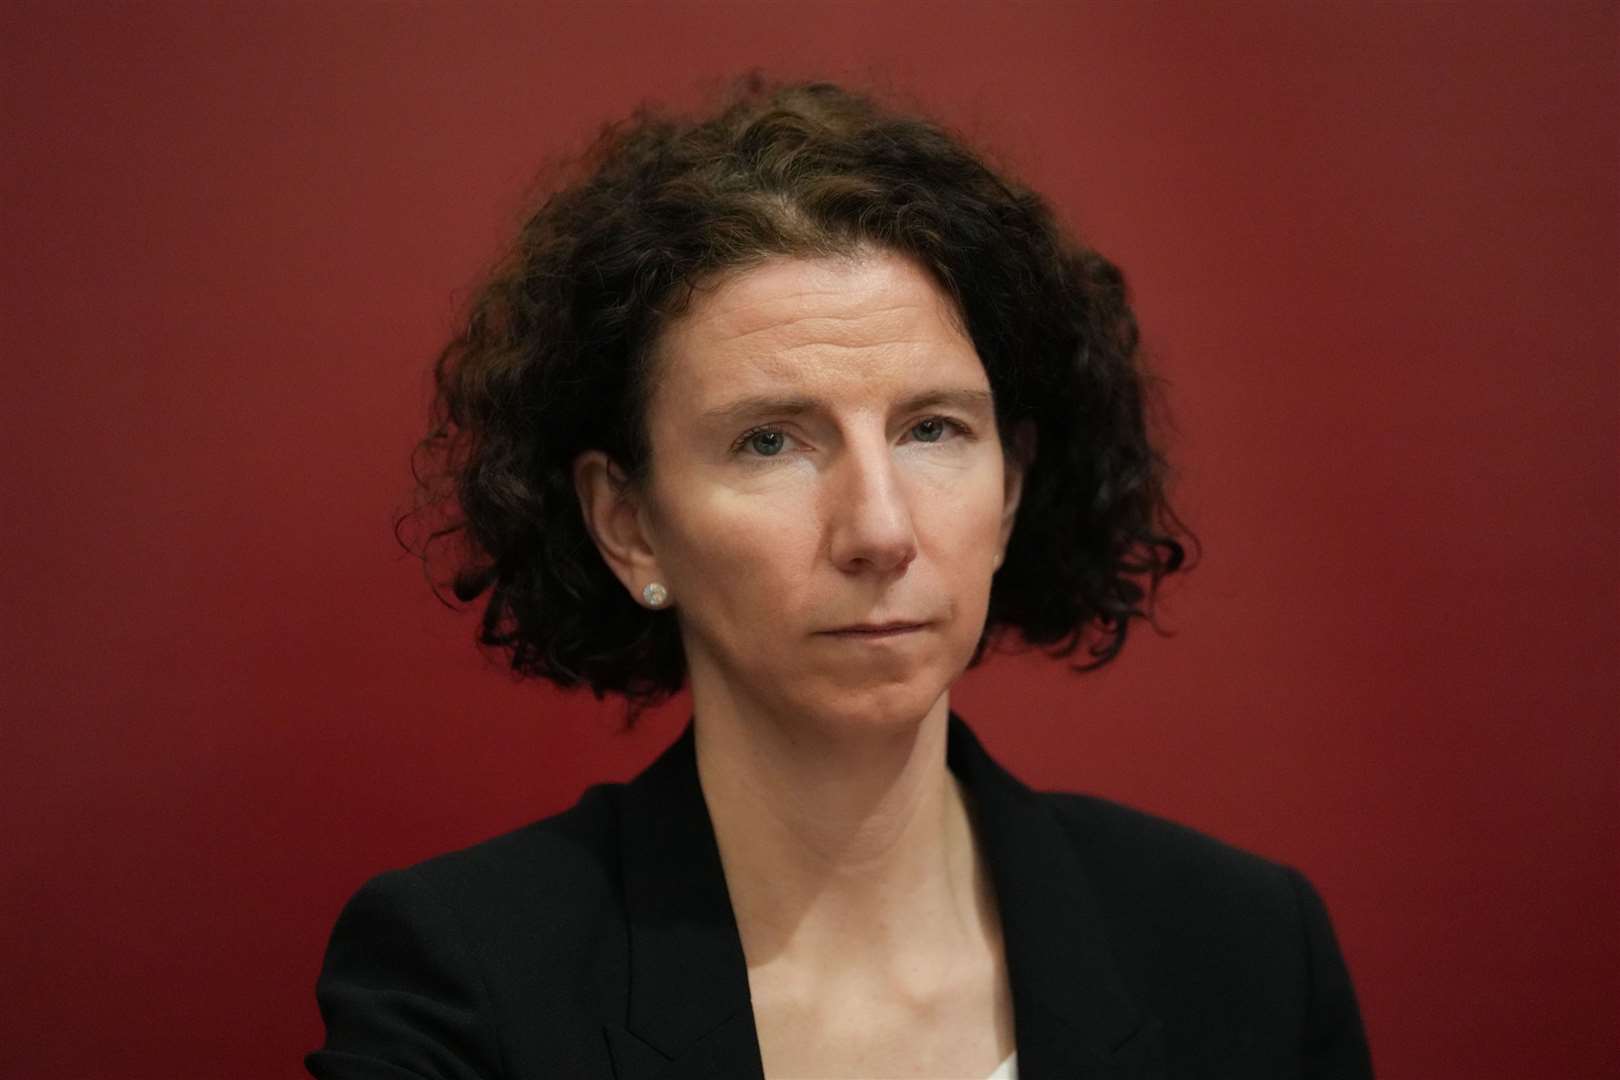 Anneliese Dodds has been responding in the media to questions about comments previously made by new Labour MP Ms Elphicke (PA)